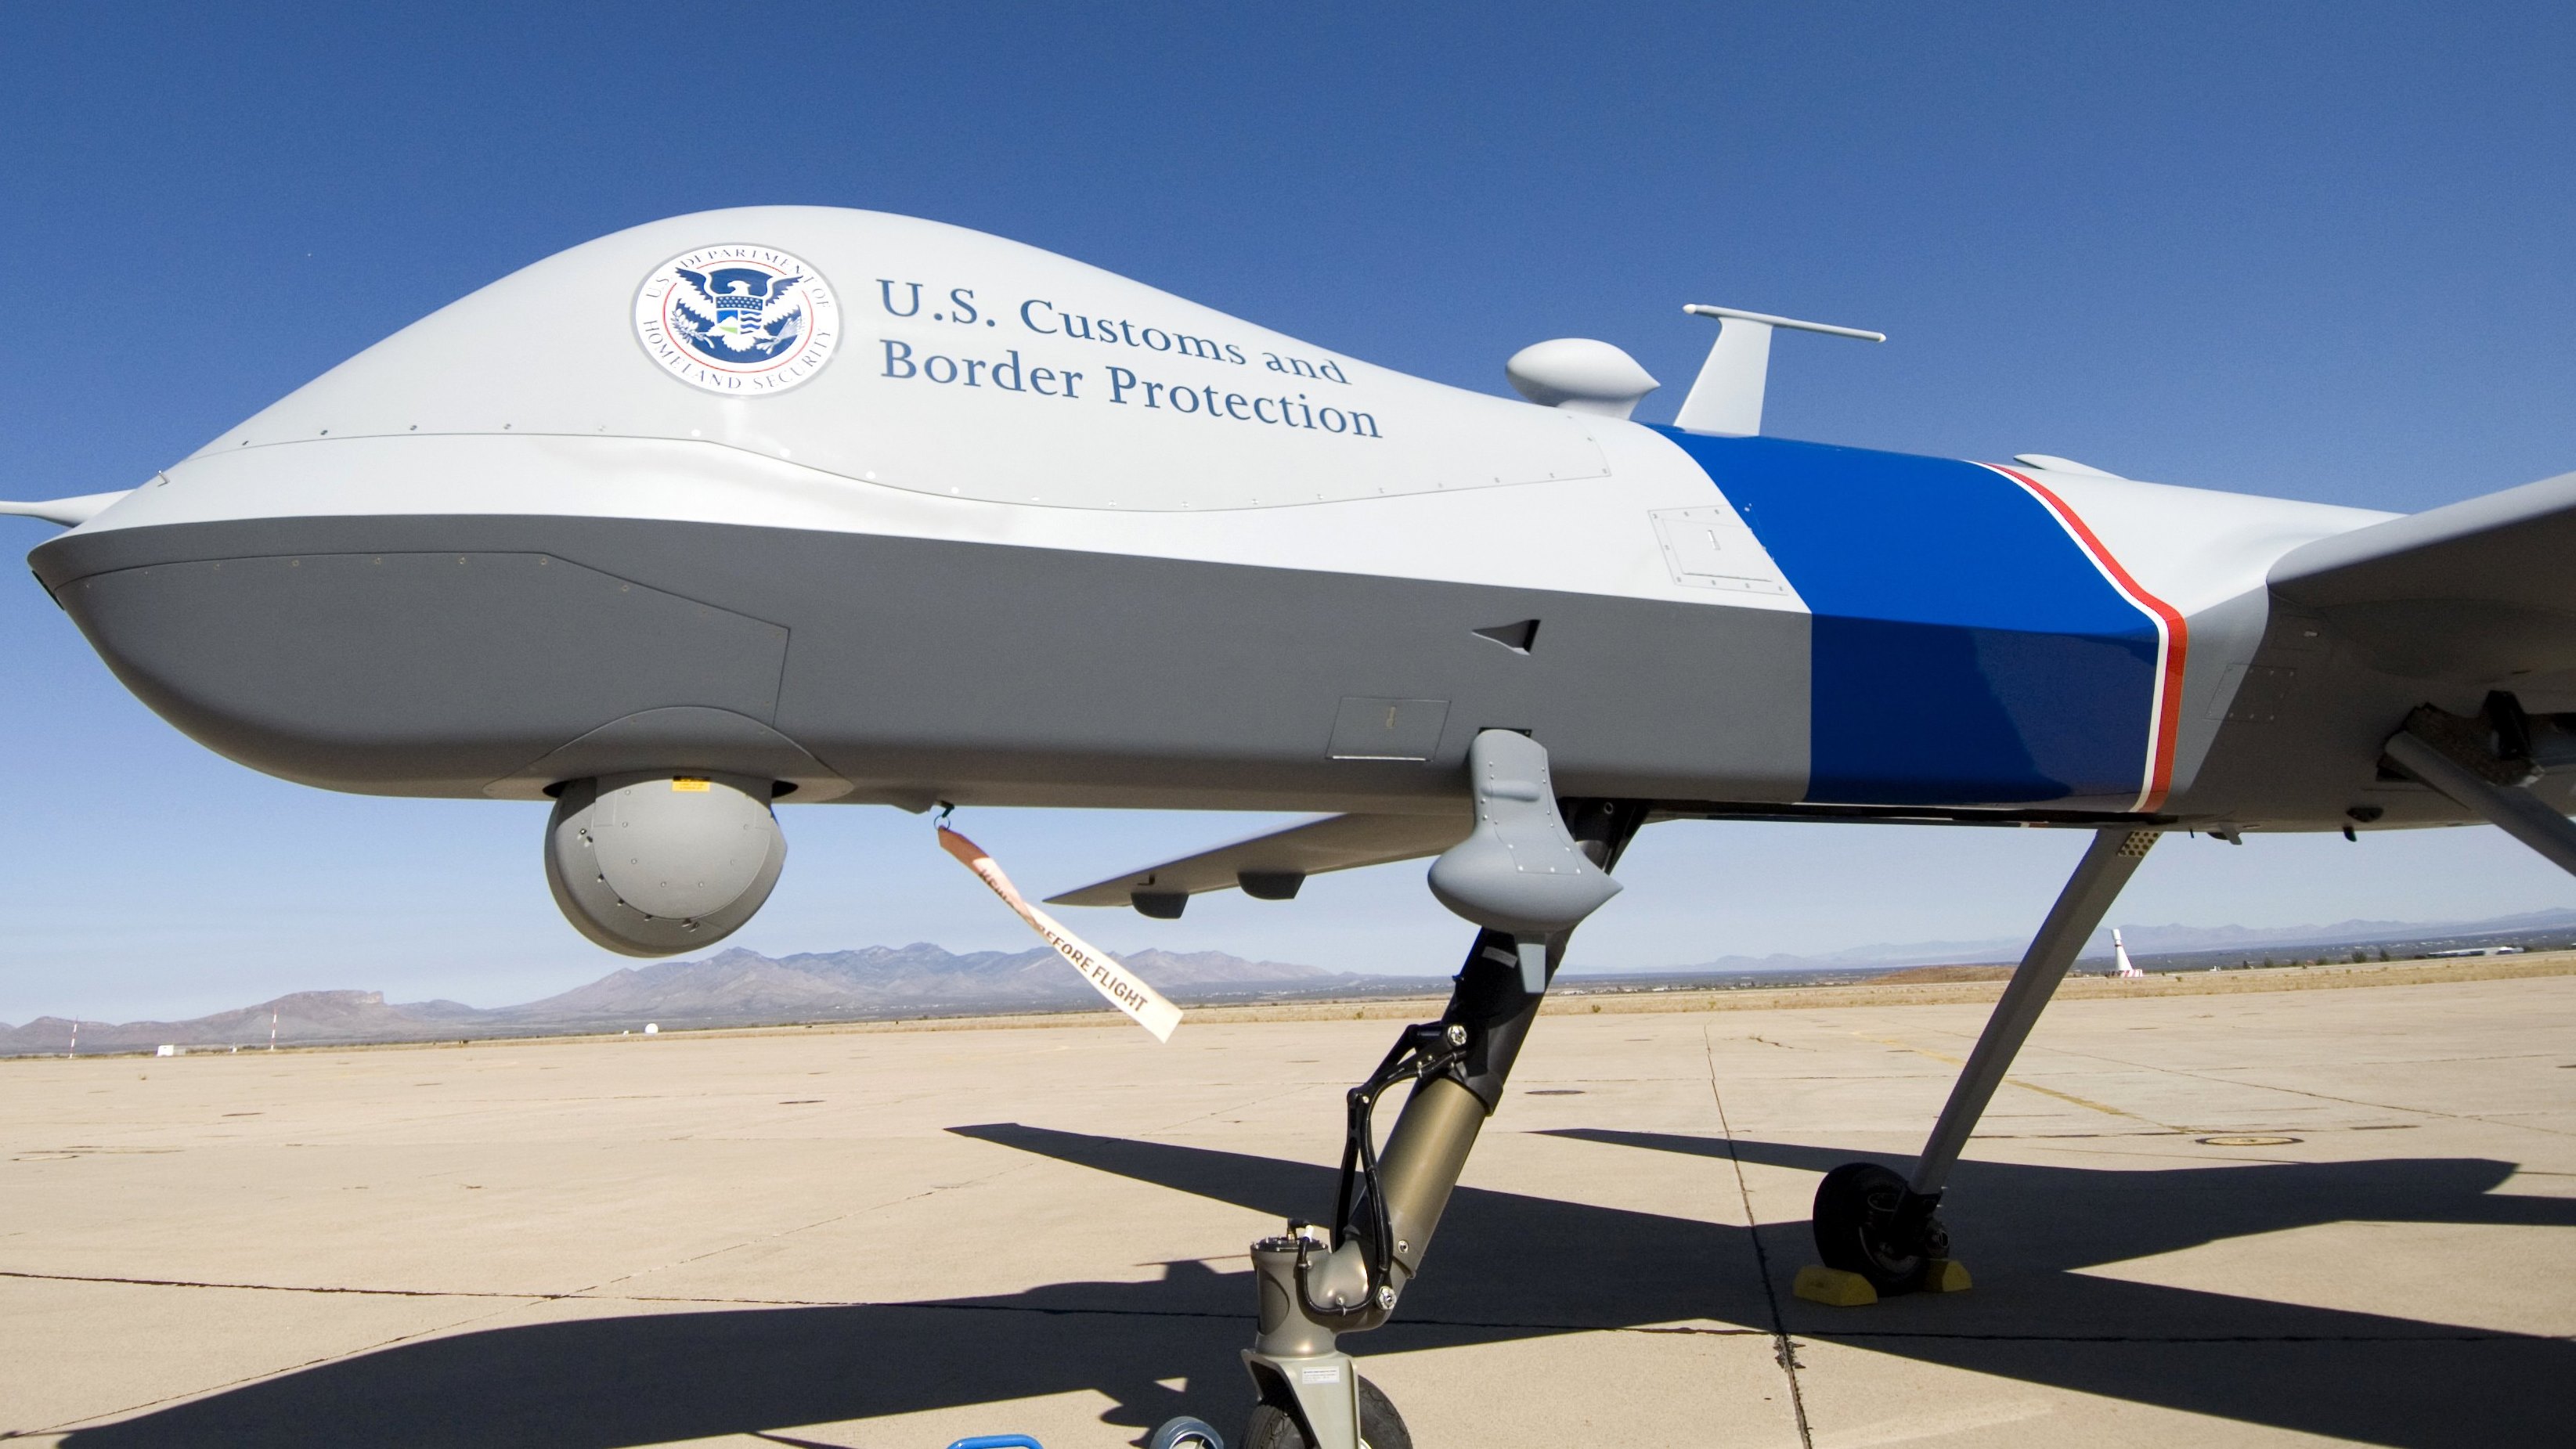 Report: National Guard Wants to Fly MQ-9 Reaper Drones at 